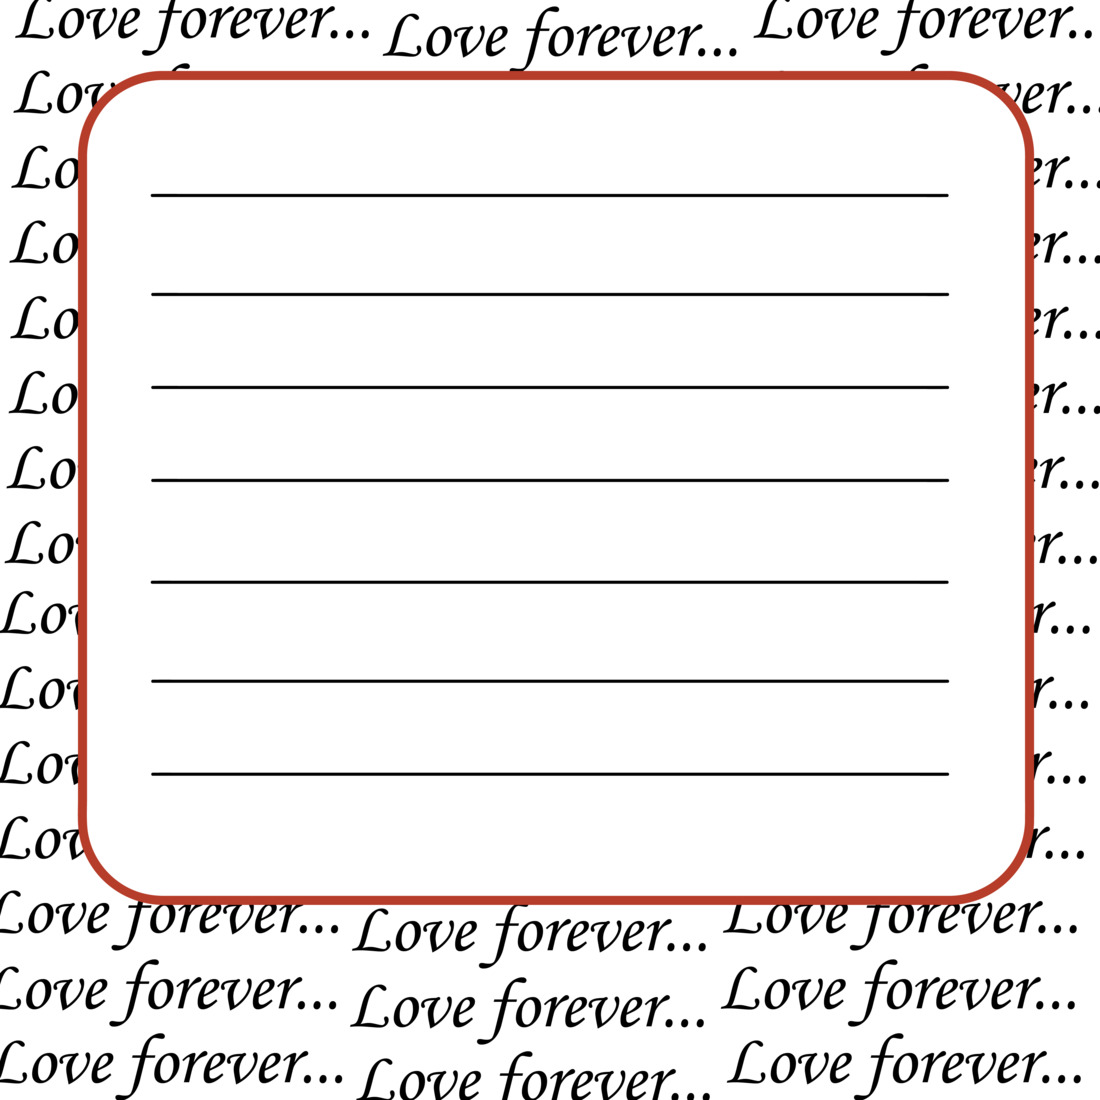 Love forever preview image.